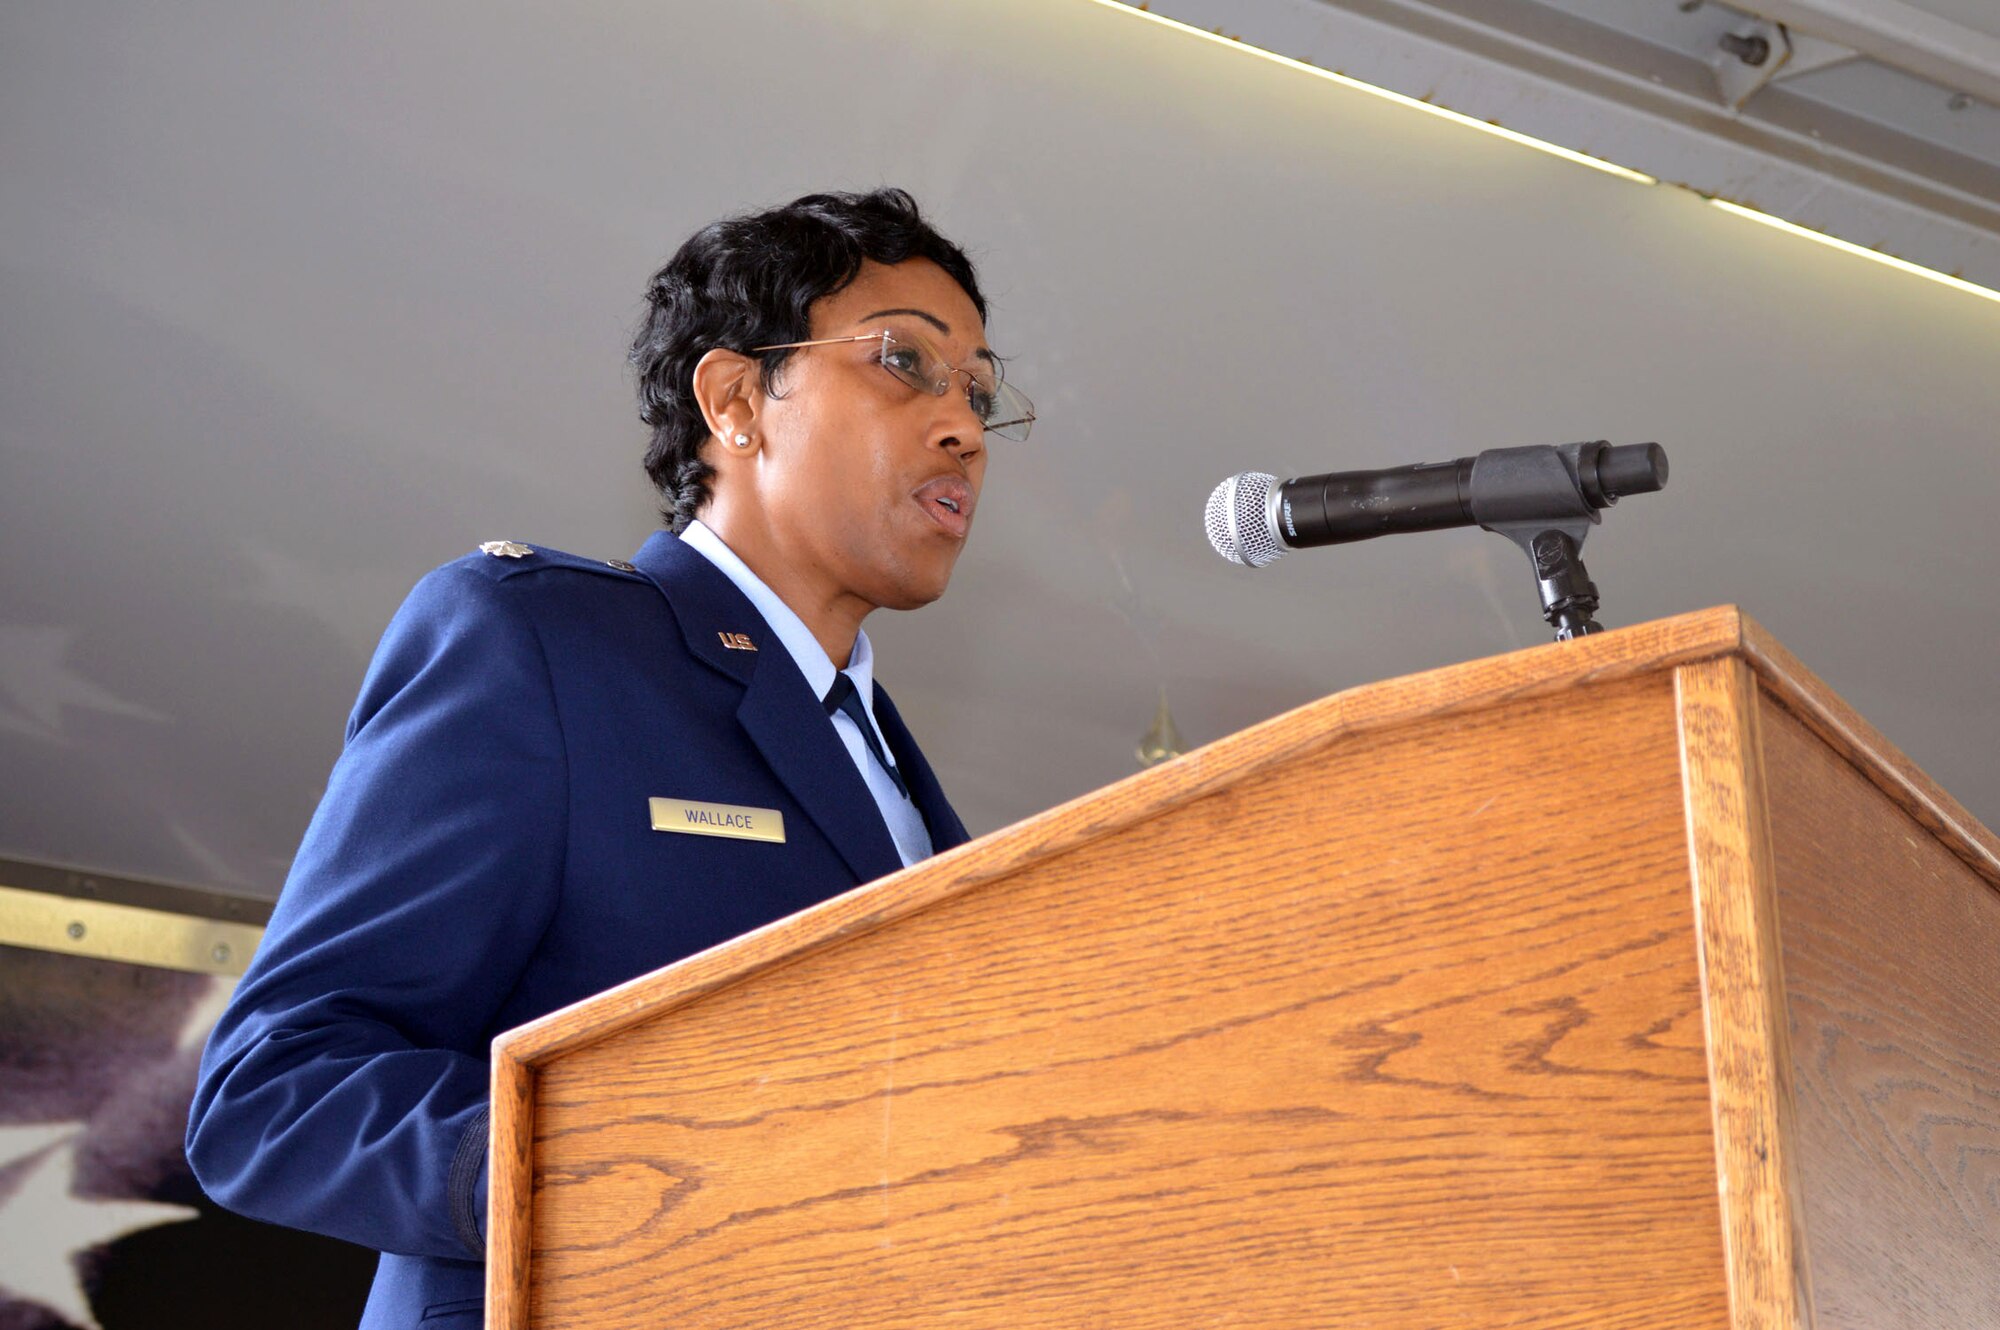 Lt. Col. Kimberly Wallace, 43rd Air Base Squadron commander, provides remarks to Airmen of the 43rd ABS and guests, after assuming command of the 43rd ABS July 1, 2015, during the 43rd ABS redesignation and change of command ceremony at Pope Army Airfield, North Carolina. Logistics and force support Airmen and functions transferred to the newly established squadron from the inactivated 43rd Logistics Readiness Squadron and the 43rd Force Support Squadron. (U.S. Air Force photo/Marvin Krause)